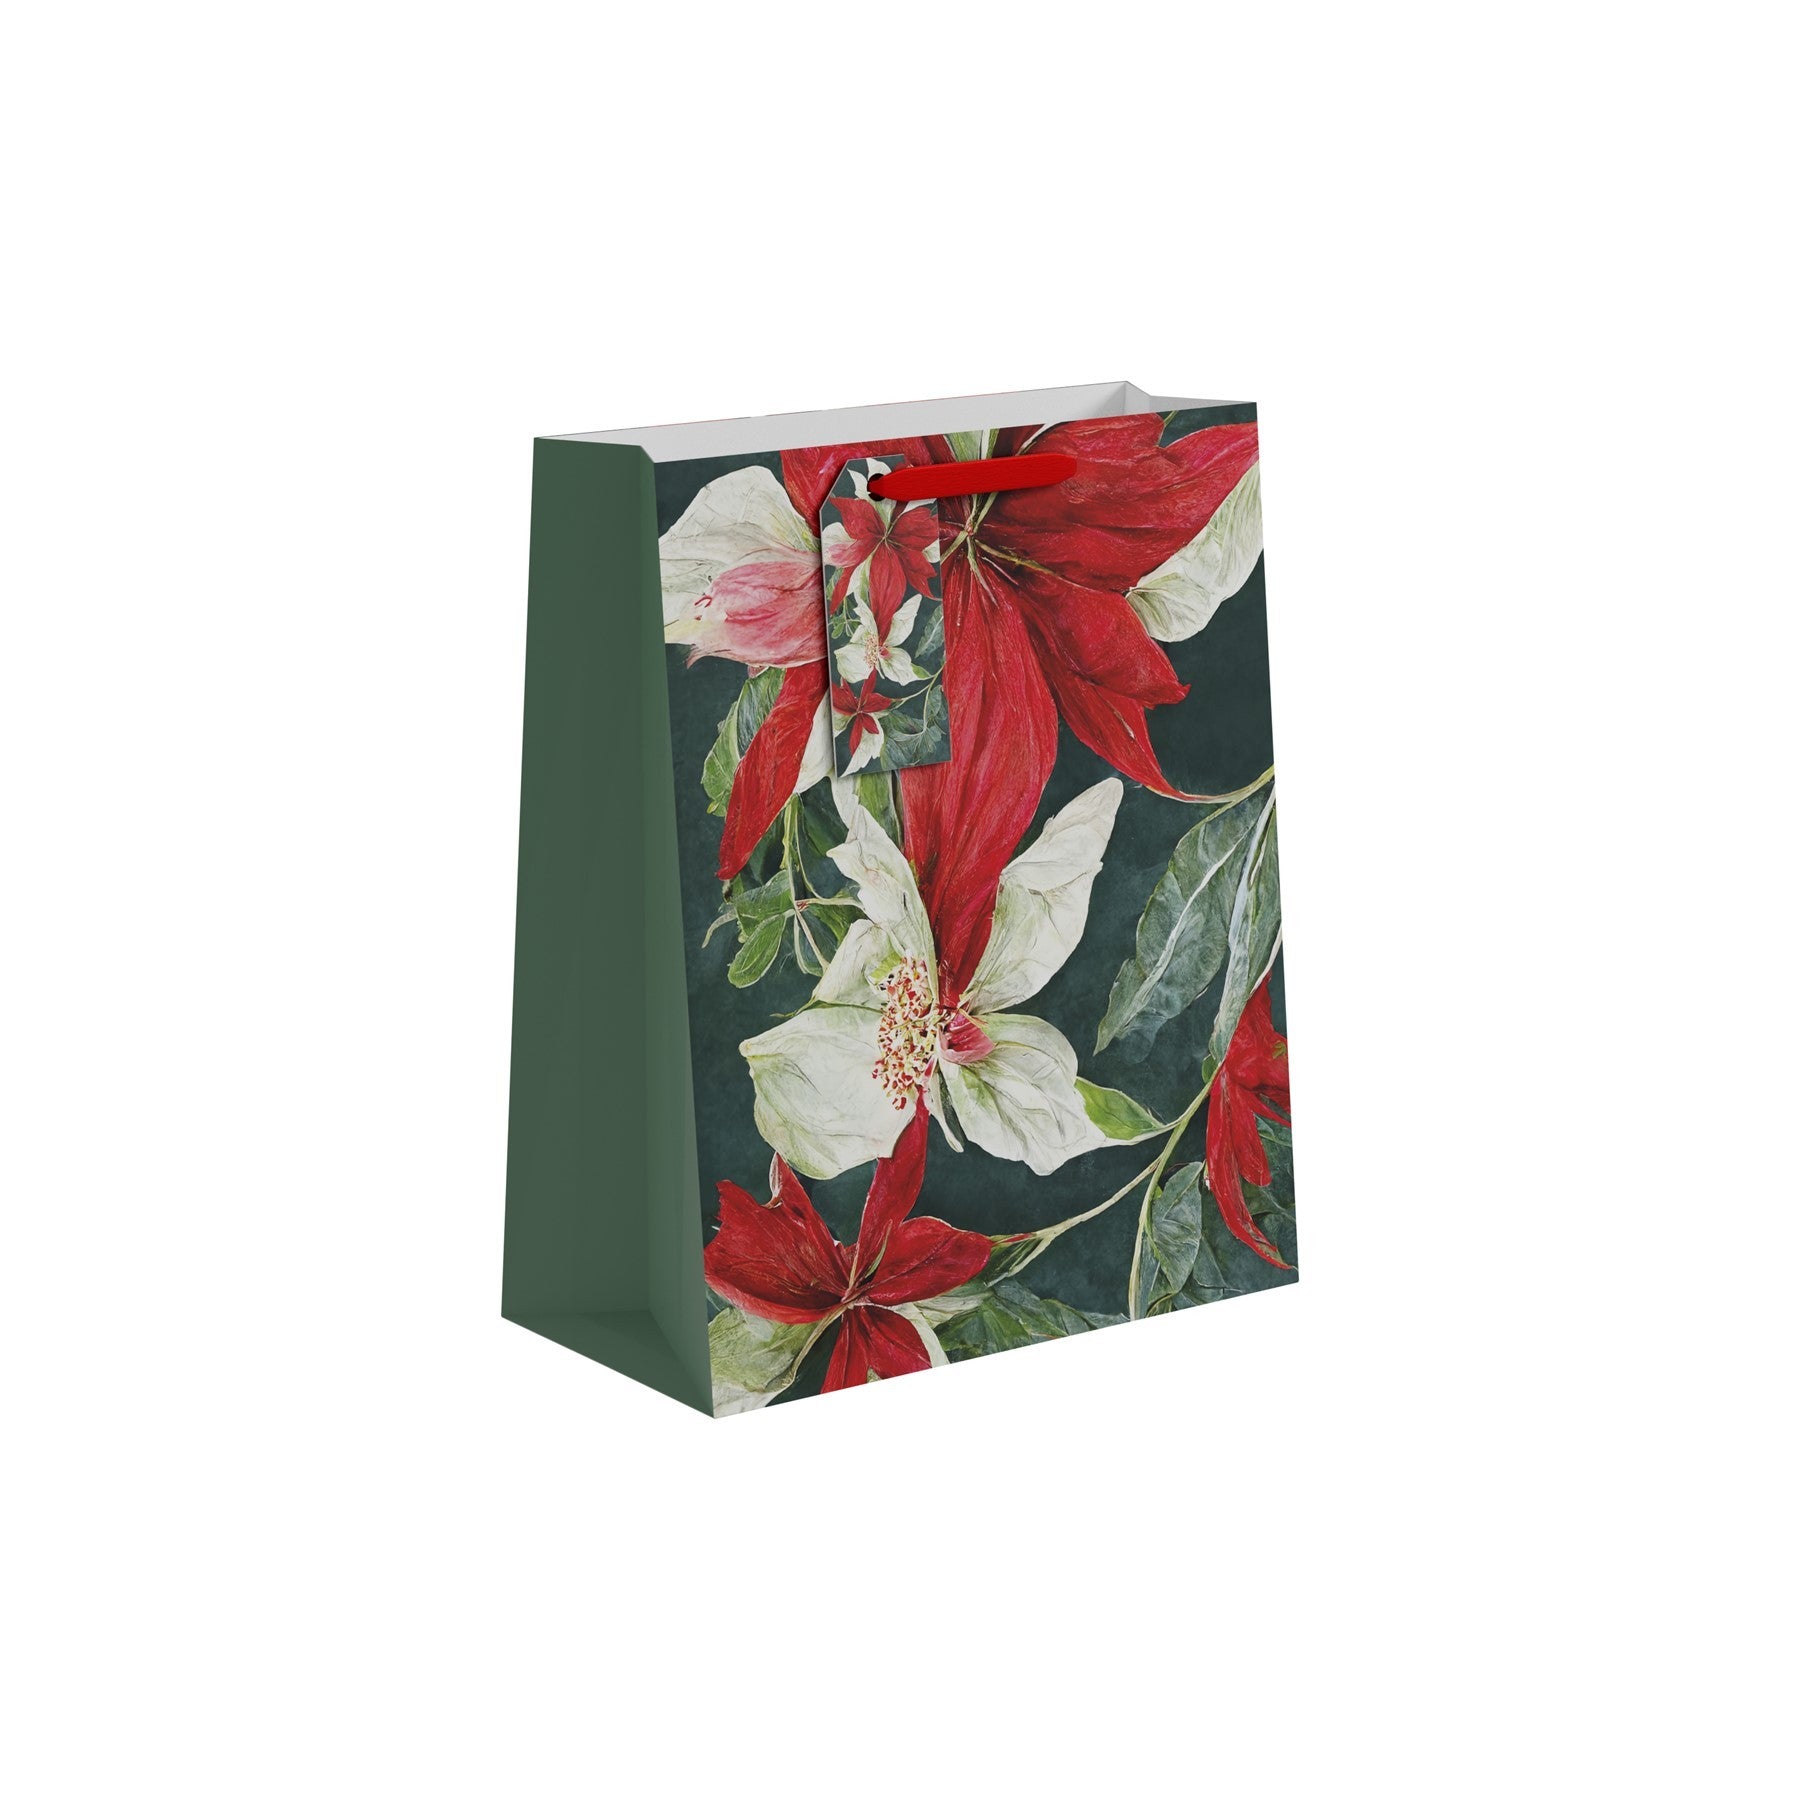 View Red White Poinsettia Gift Bag Large information